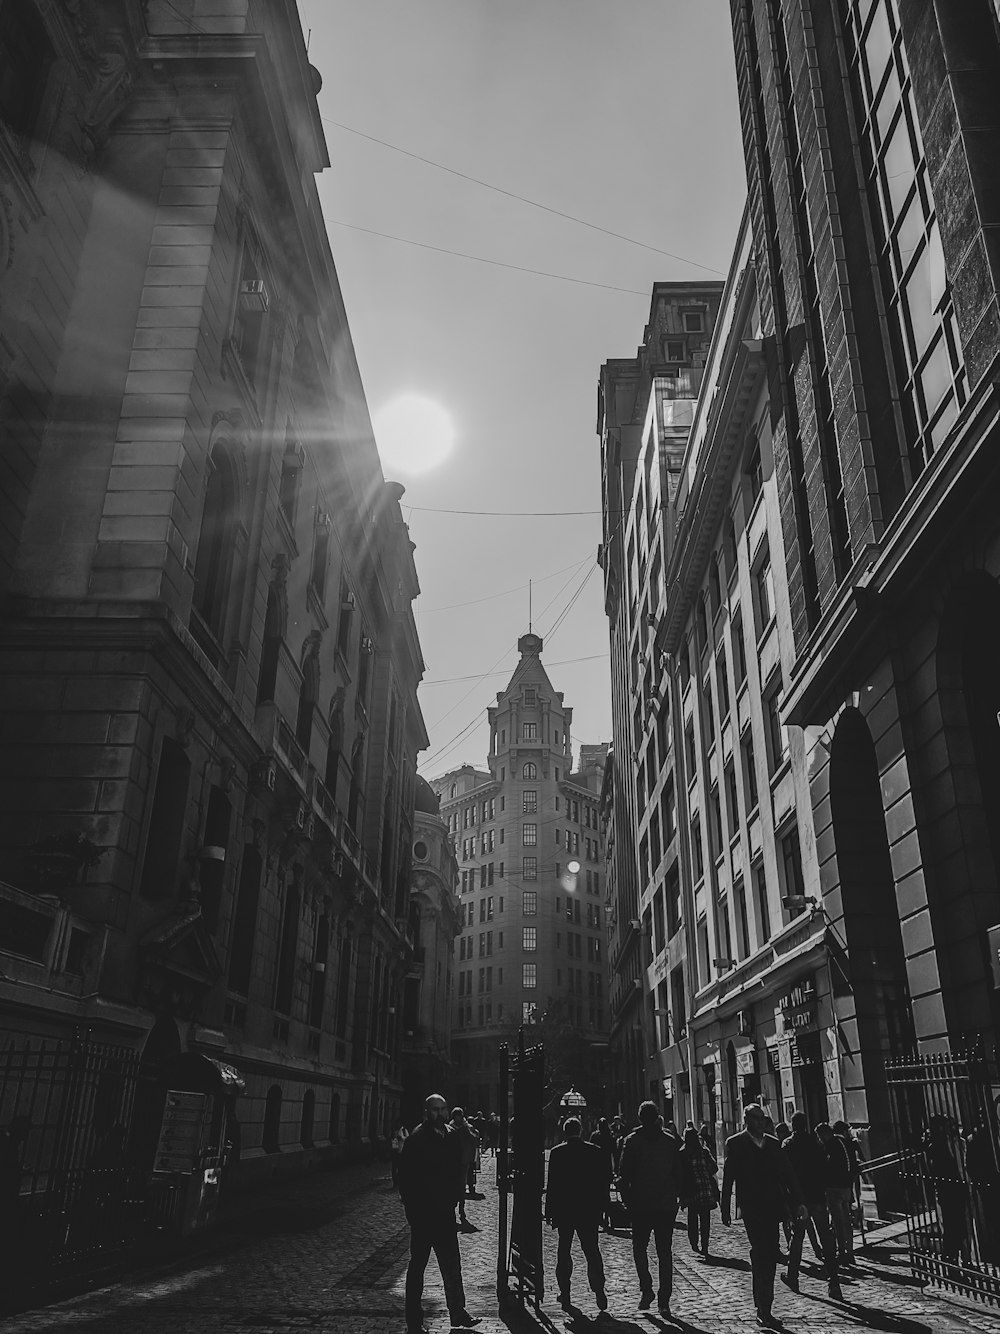 grayscale photo of a city street